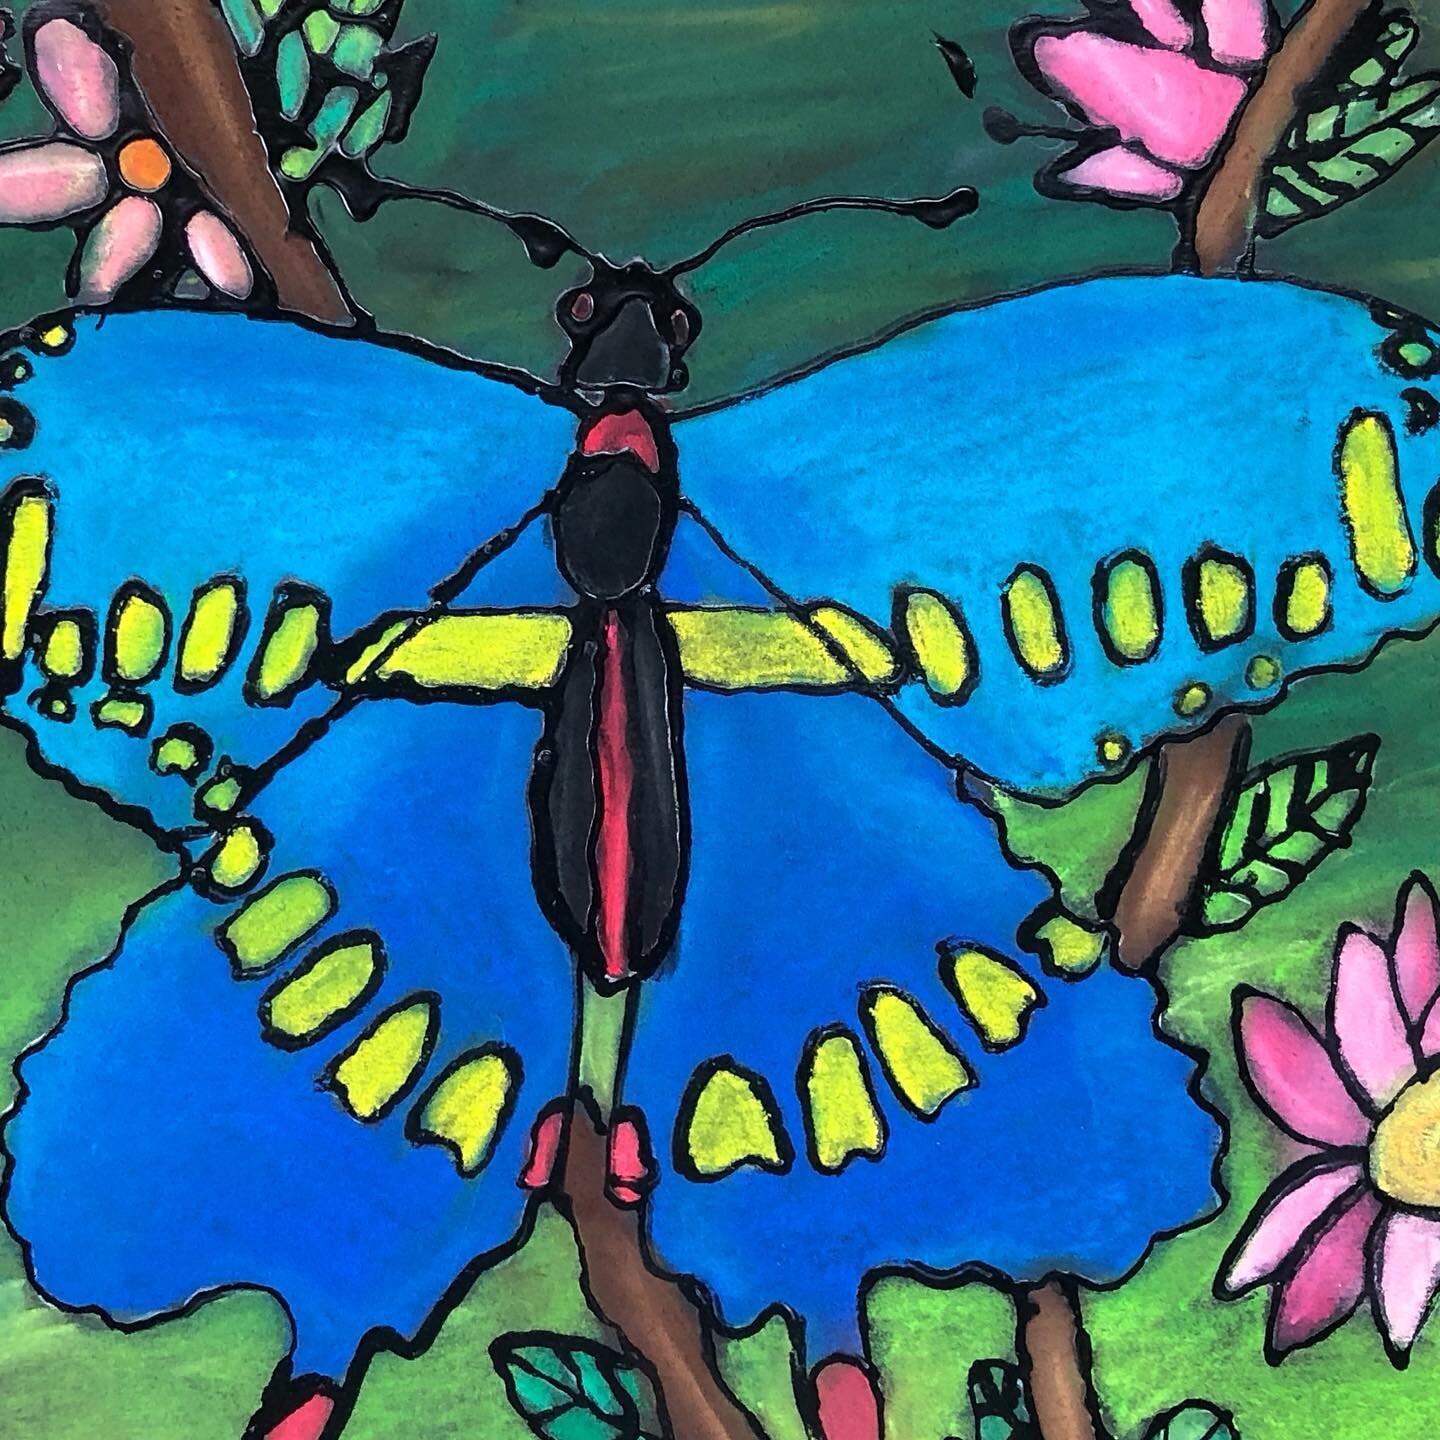 Beautiful Butterflies
Using black glue and pastels on black poster board girls @edgewoodranch created these Beautiful Butterflies. The butterflies will be part of a children&rsquo;s art exhibit @orlandohealth in Ocoee. The exhibit will have a spring 